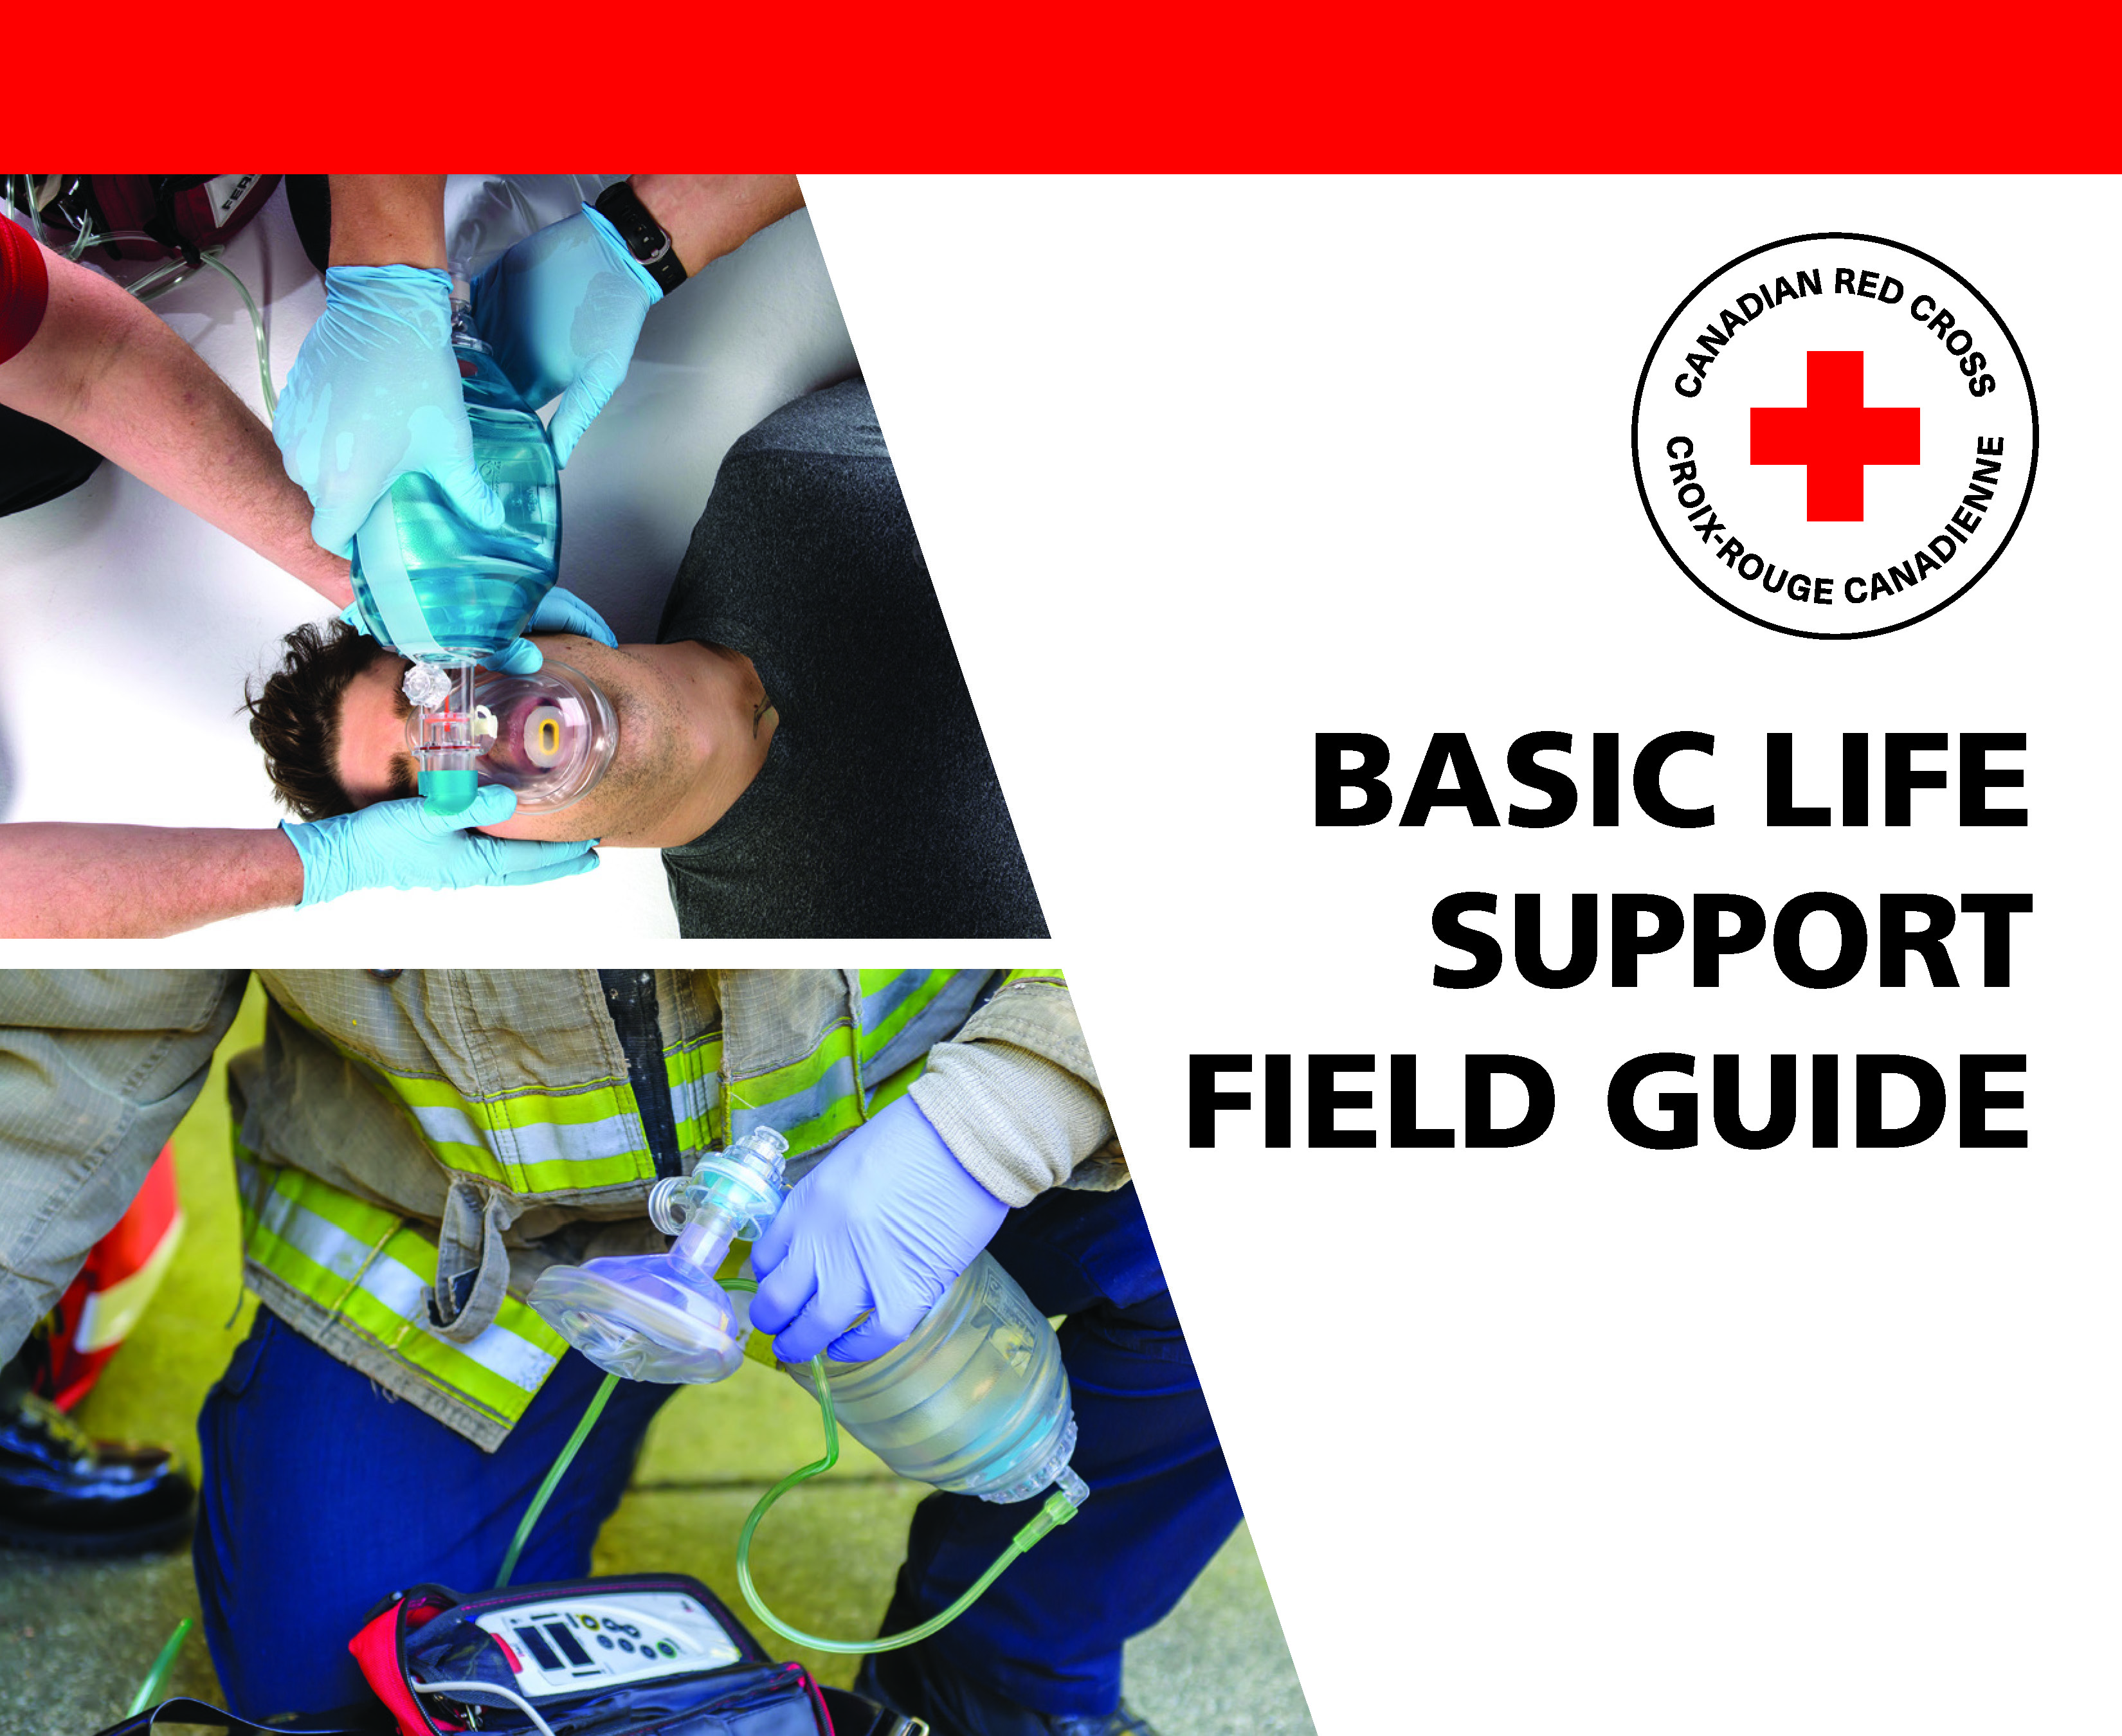 First Aid Course Materials for Basic Life Support in Victoria-TILLICUM